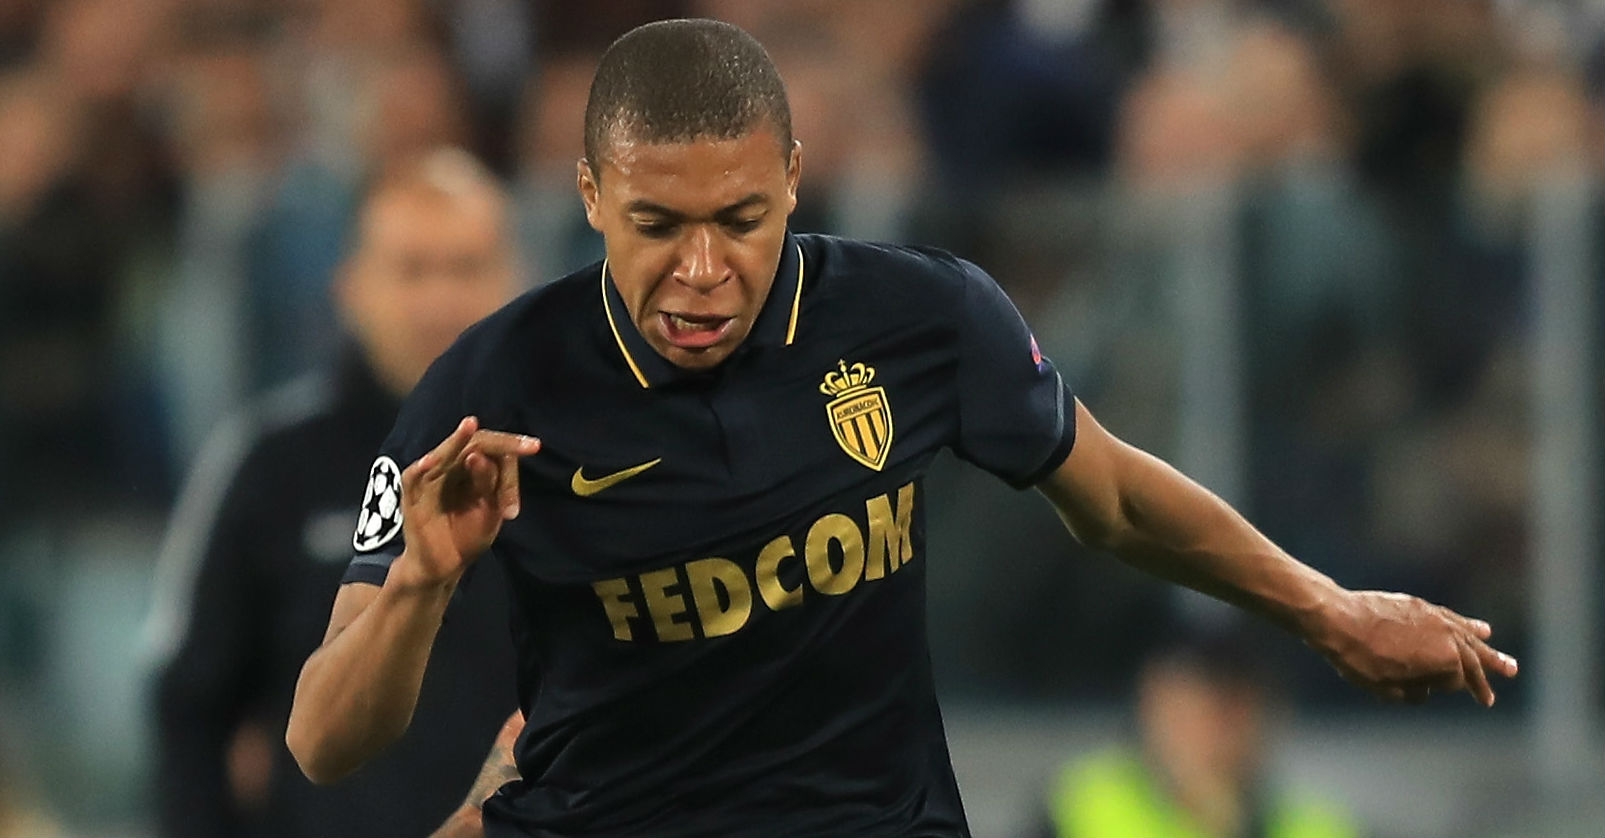 And so began a seemingly endless discussion in the media about which heavyweight team would convince Mbappe and Monaco that a transfer was warranted. Clubs like Real Madrid and Arsenal publicly announced their interest in the player.